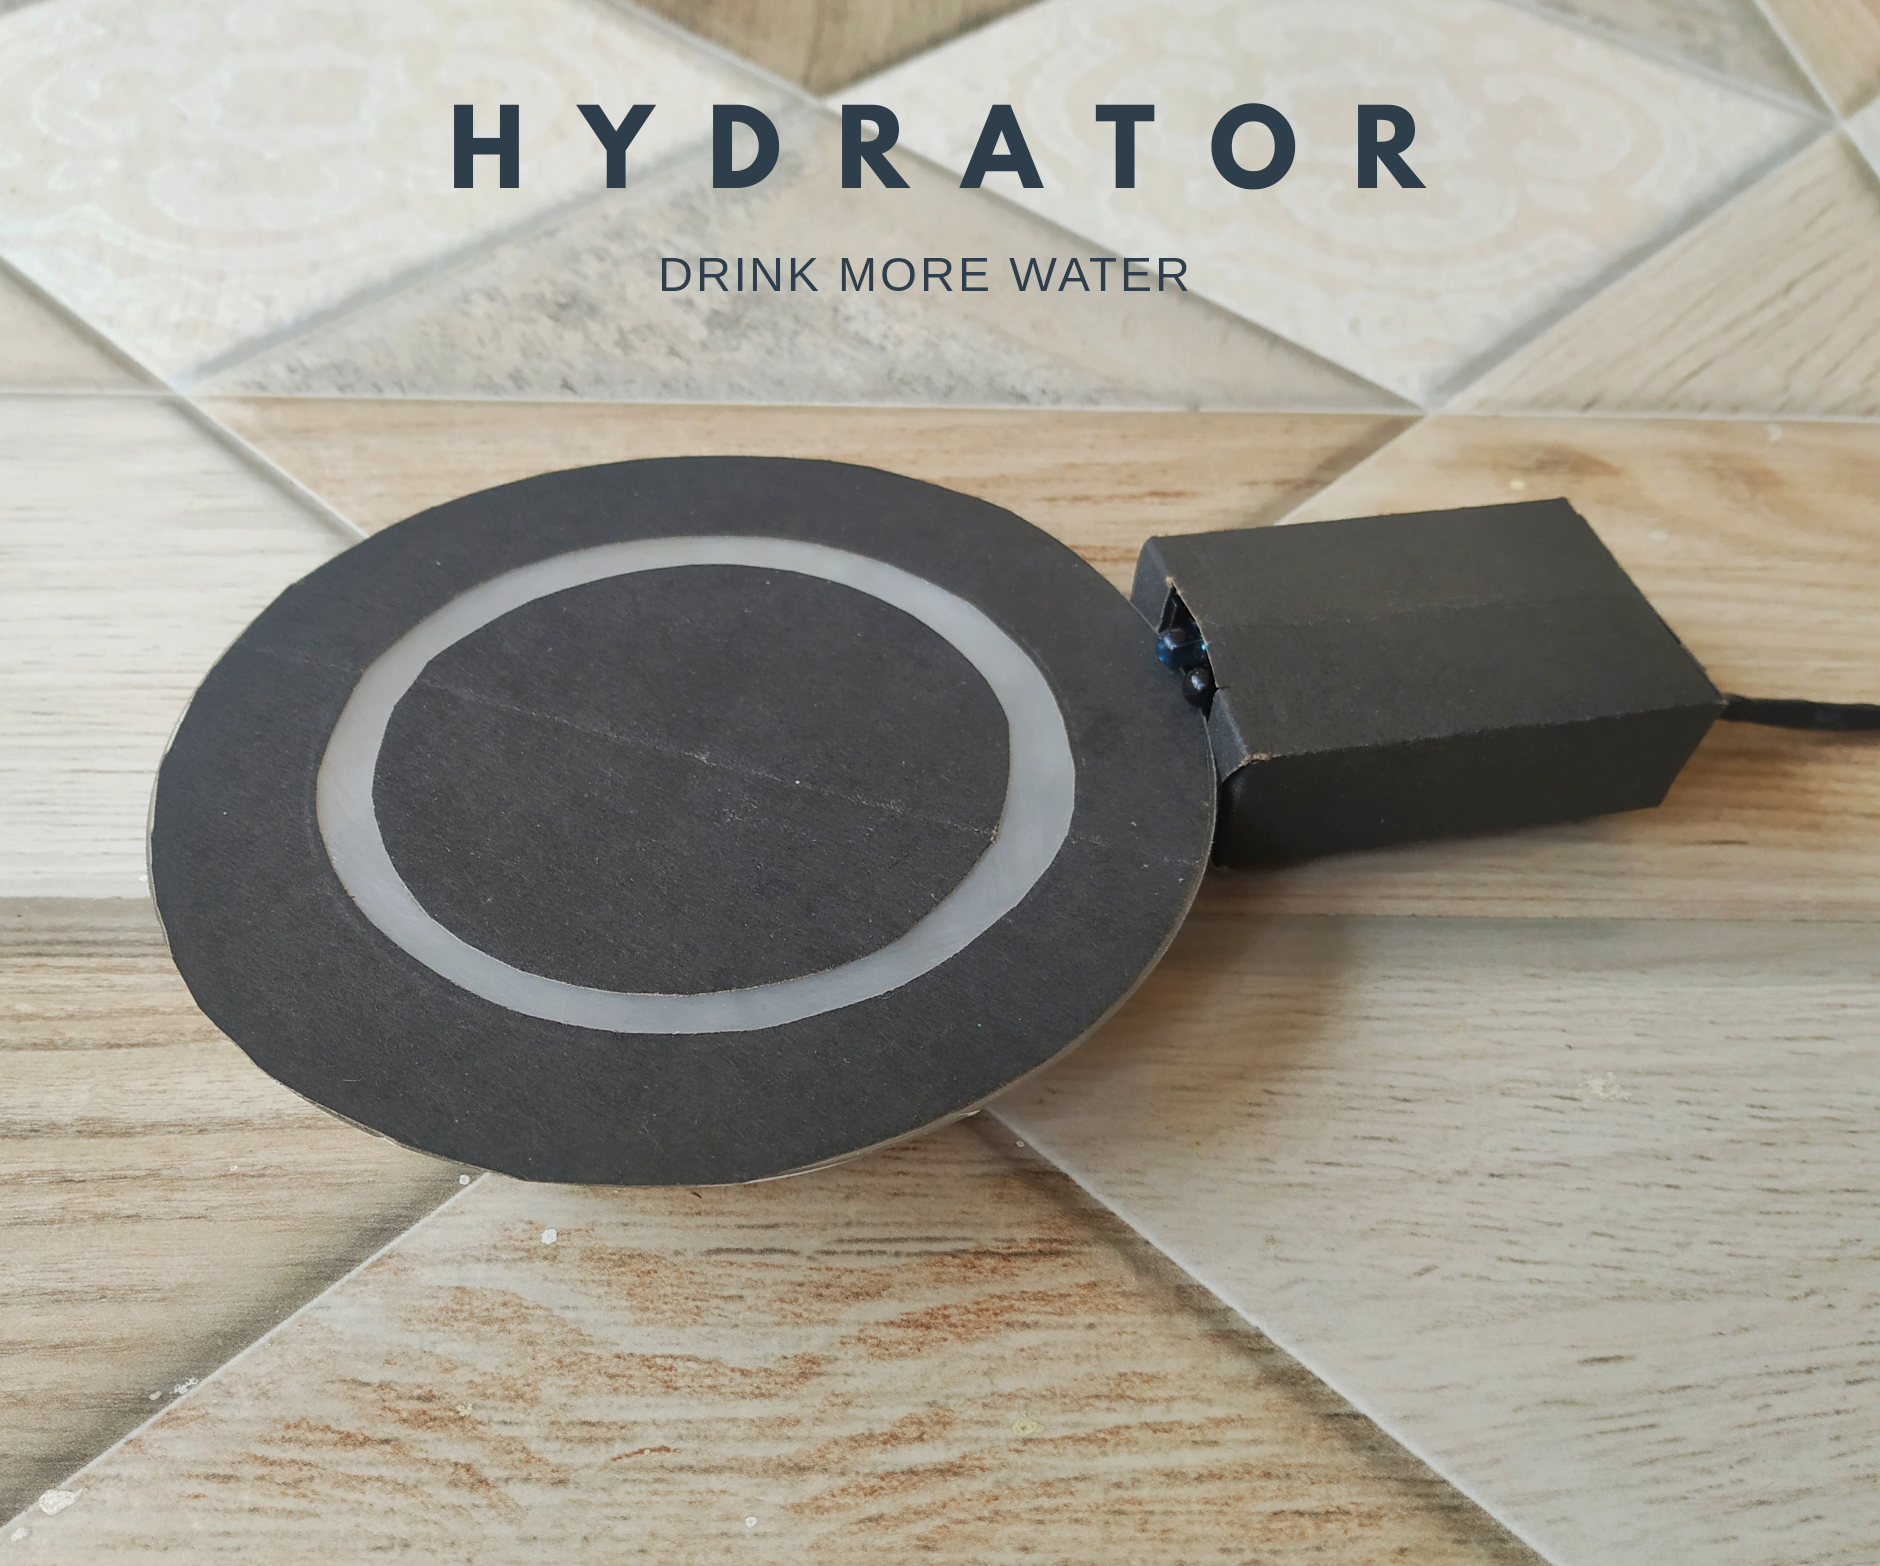 Hydrator - a Device That Motivates You to Drink Water